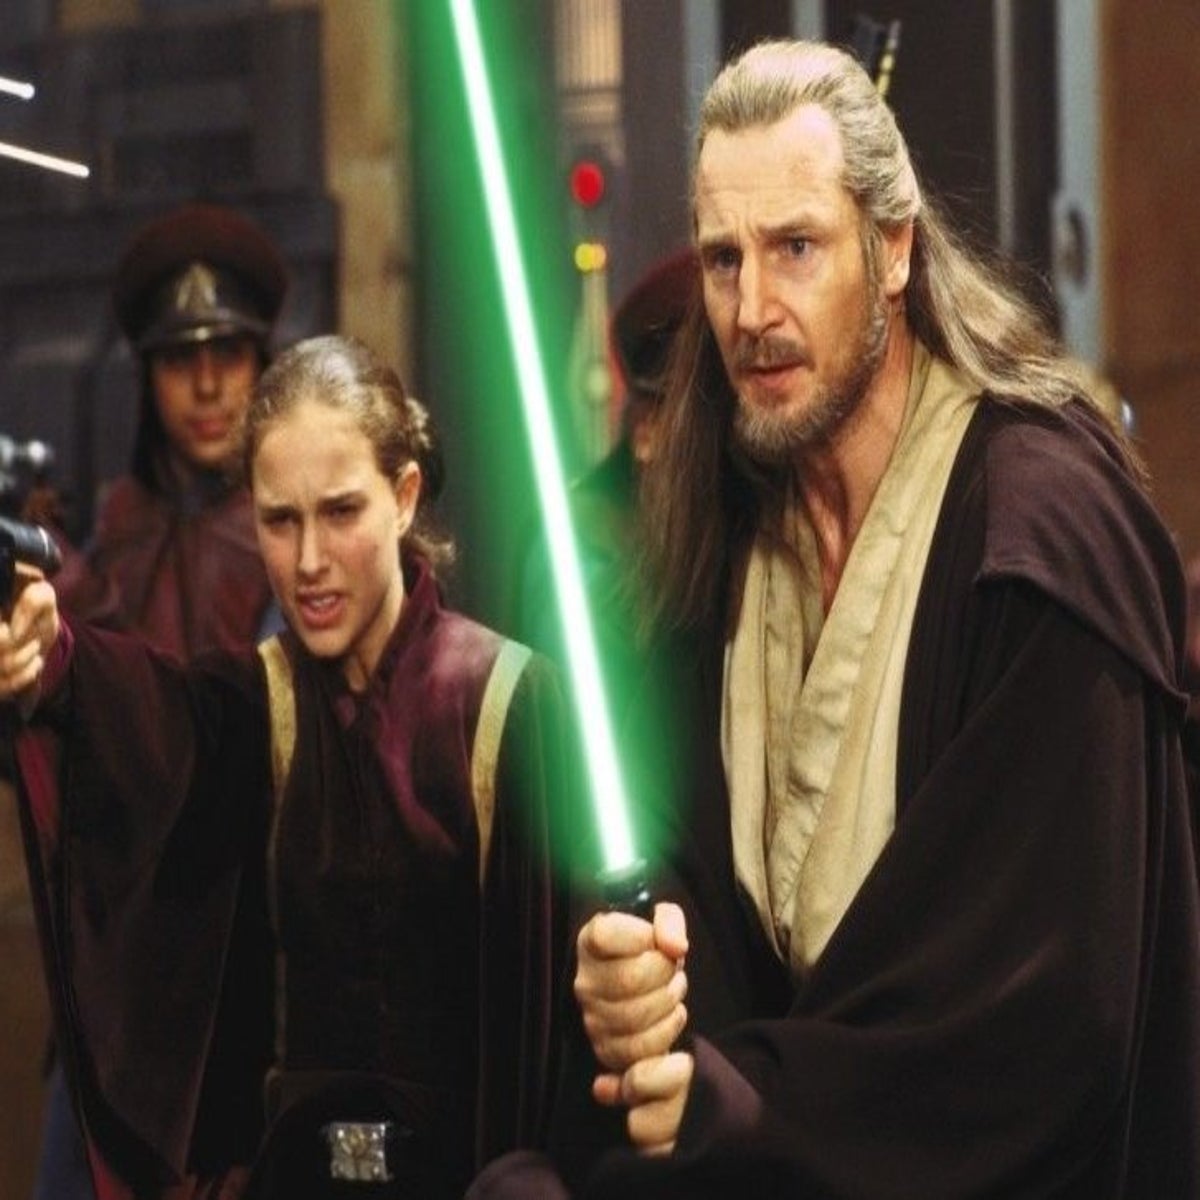 Liam Neeson Open to Reprising Role As Qui-Gon Jinn in Future Star Wars  Movies